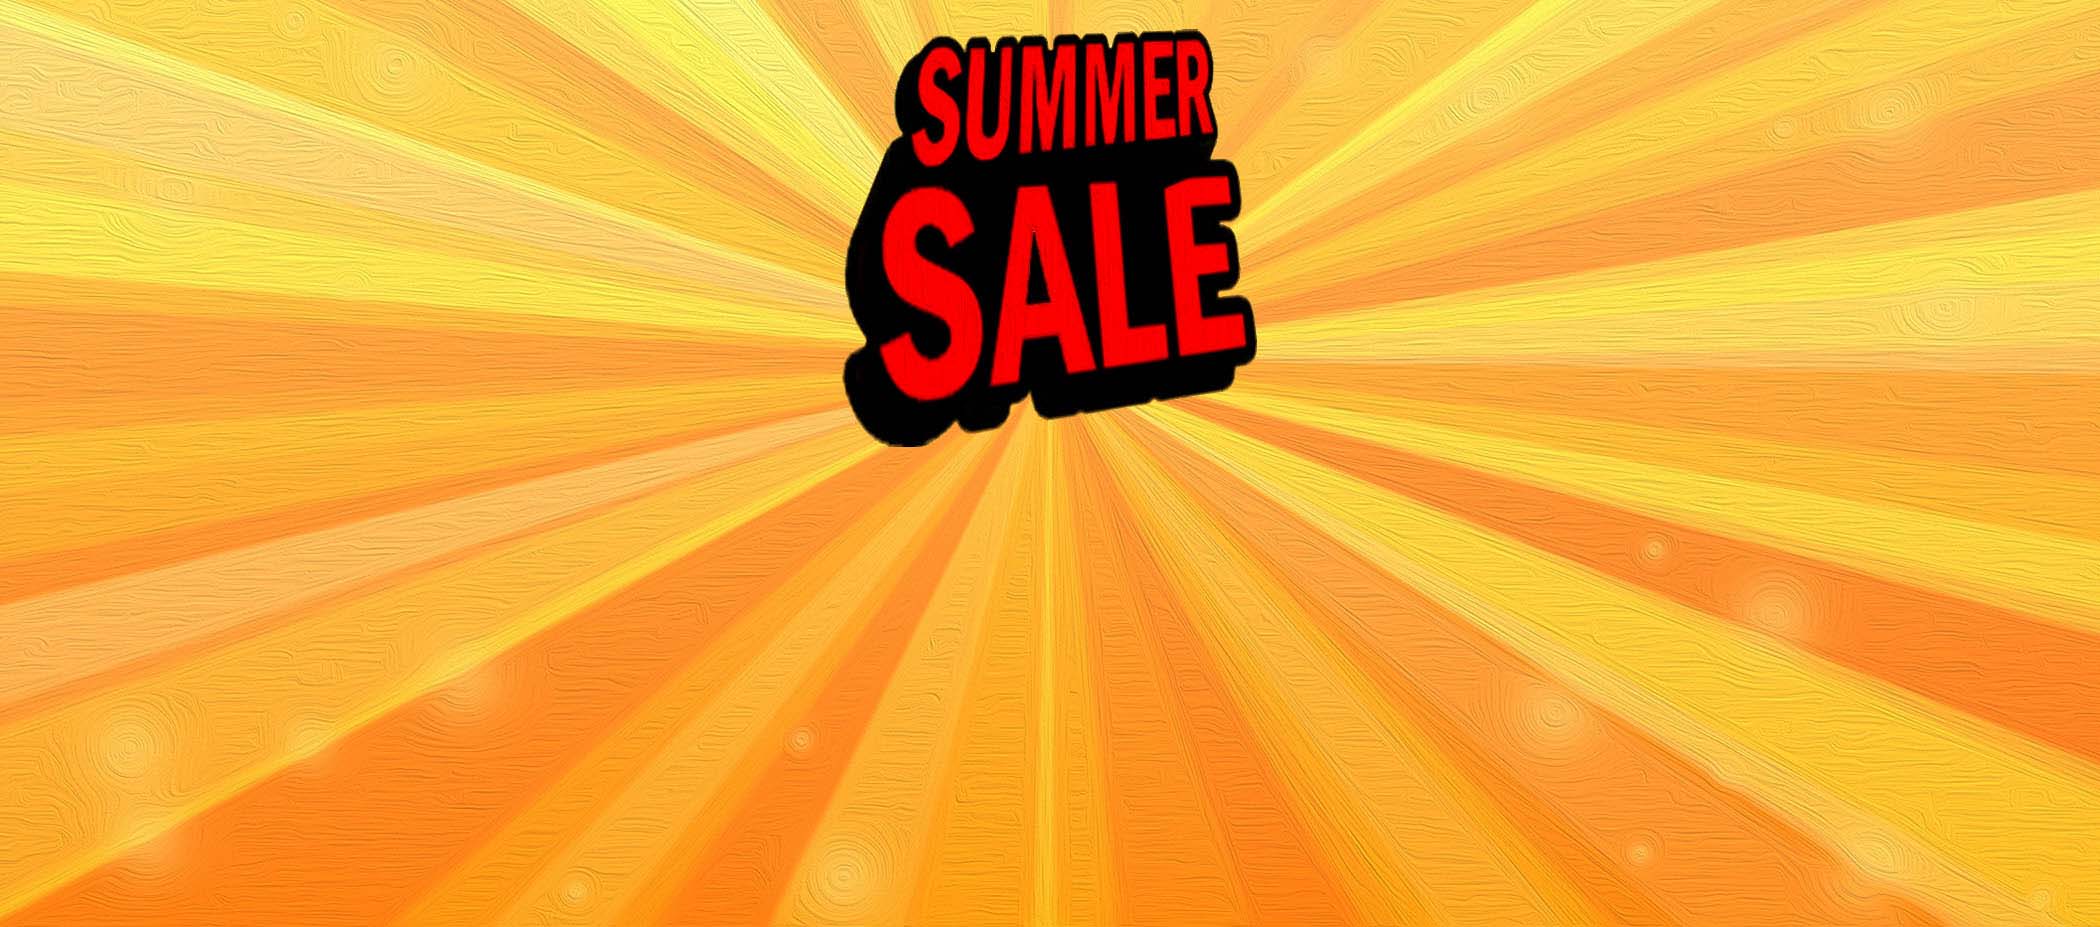 Summer sale 50% off all books